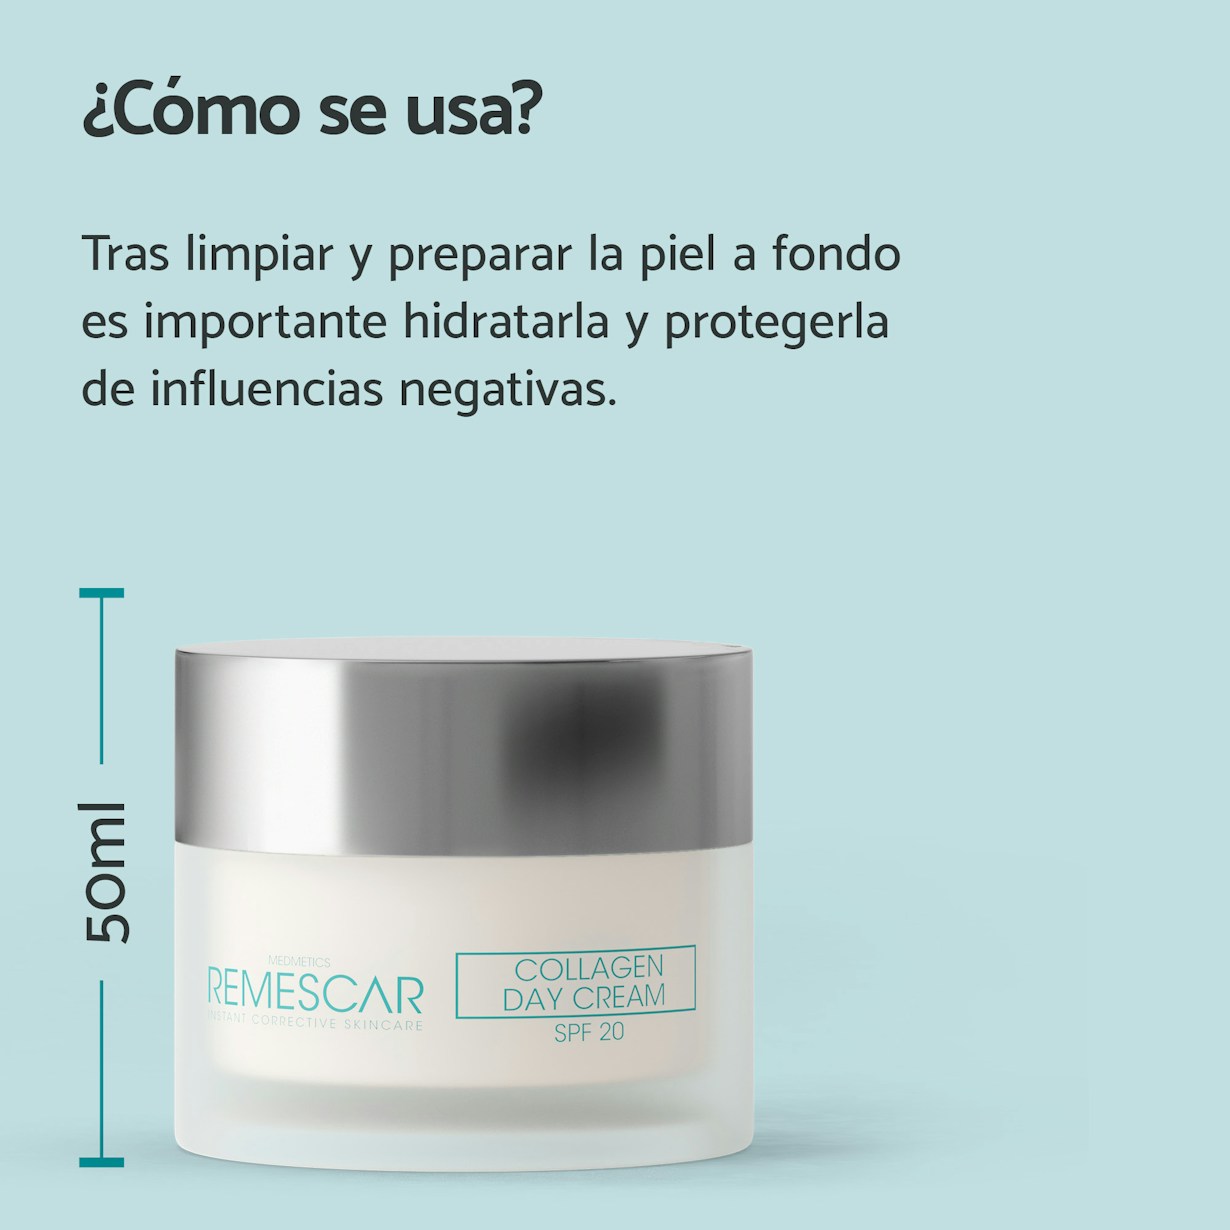 Remescar pdp pictures website and amazon 2000x2000px collagen day cream ES4